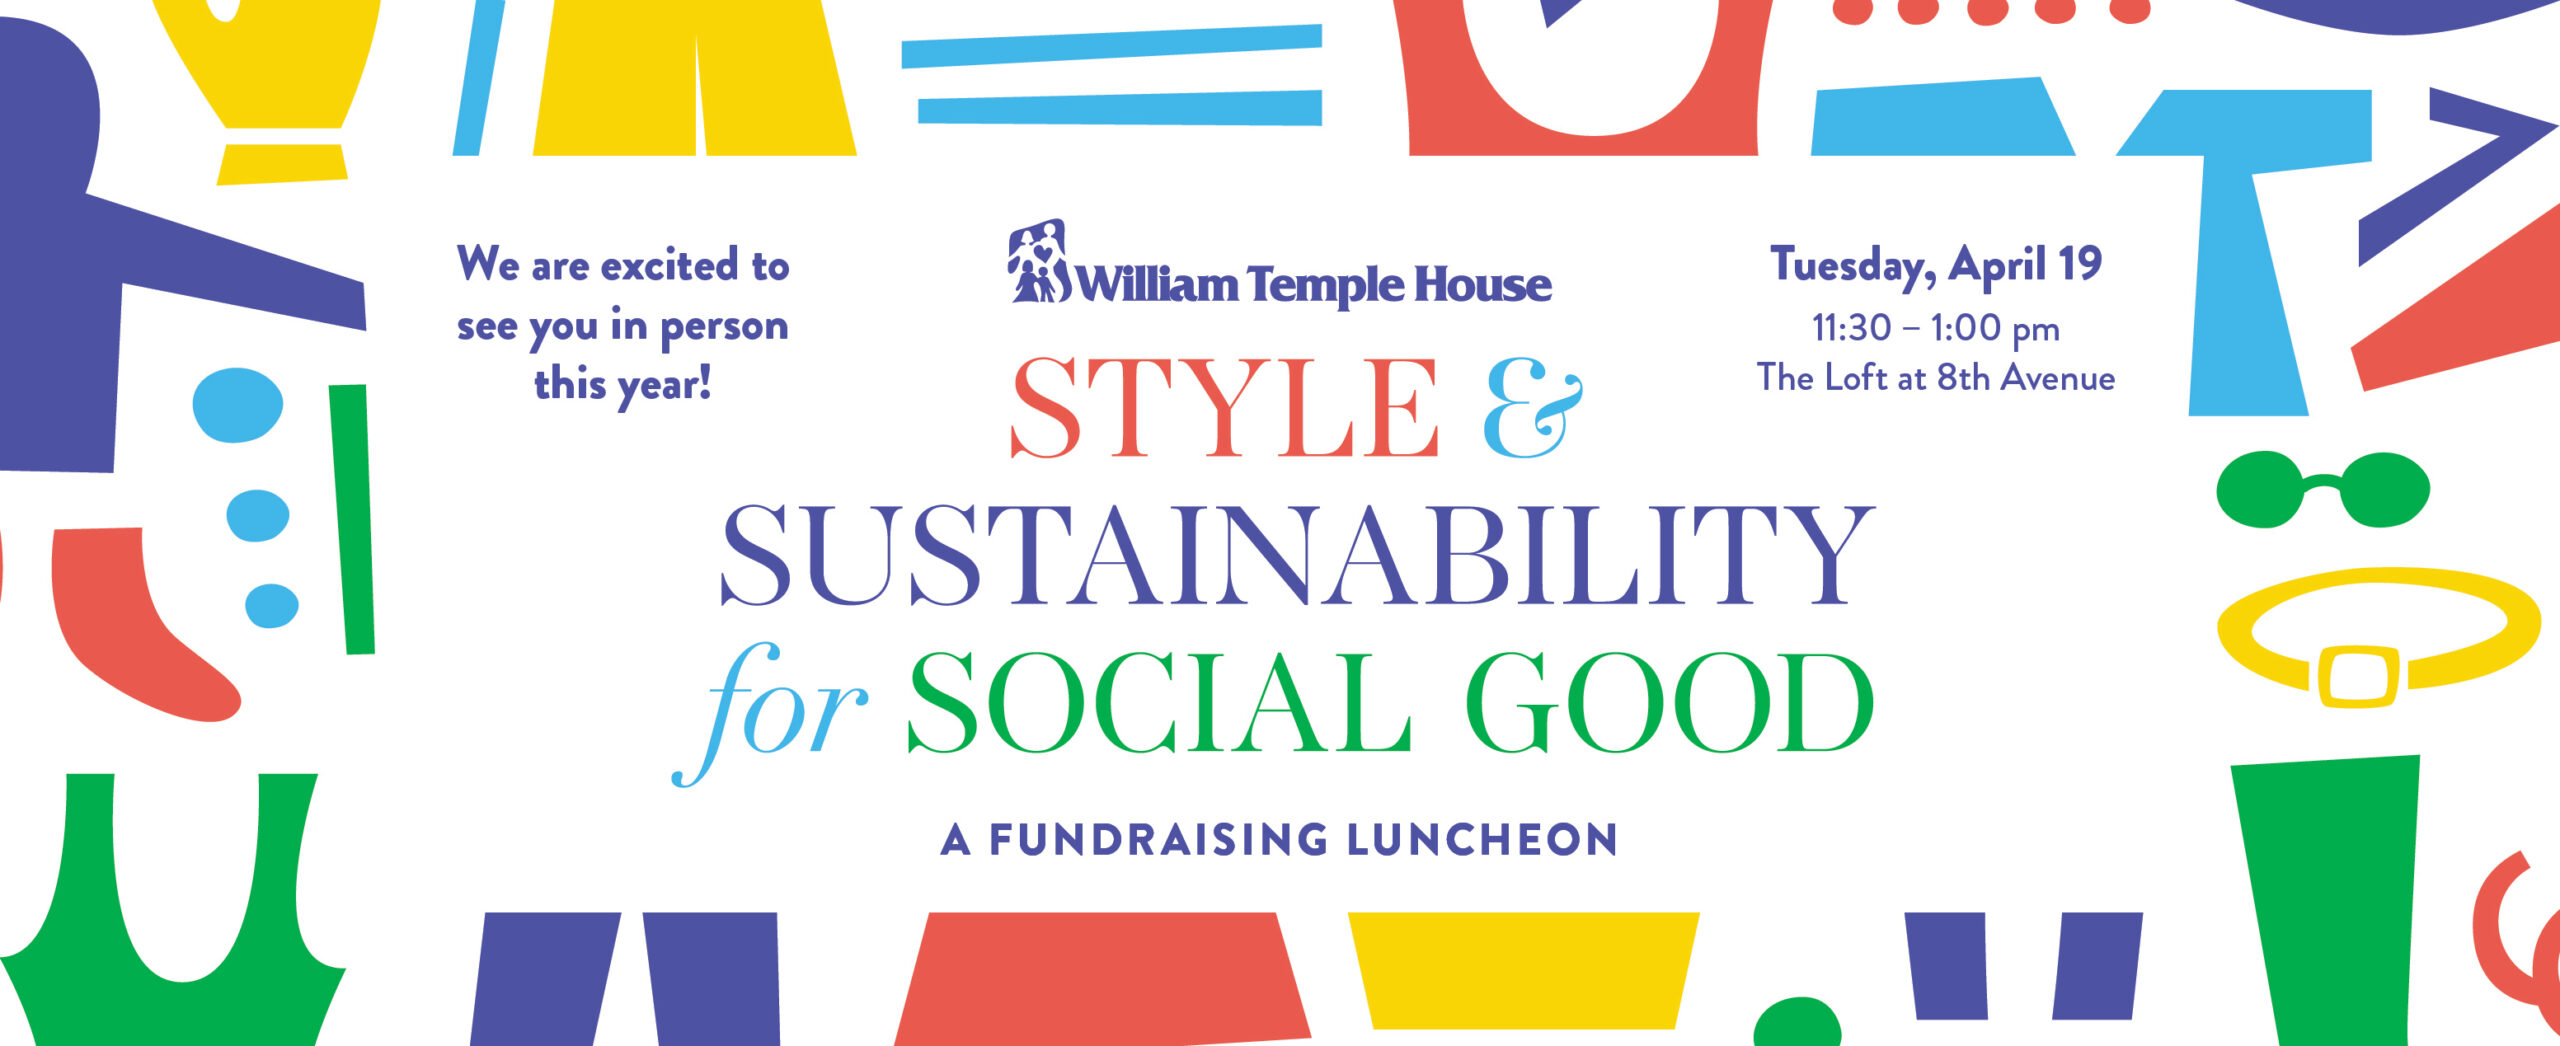 Announcing the 2021 Style & Sustainability for Social Good, William Temple House annual fundraising luncheon